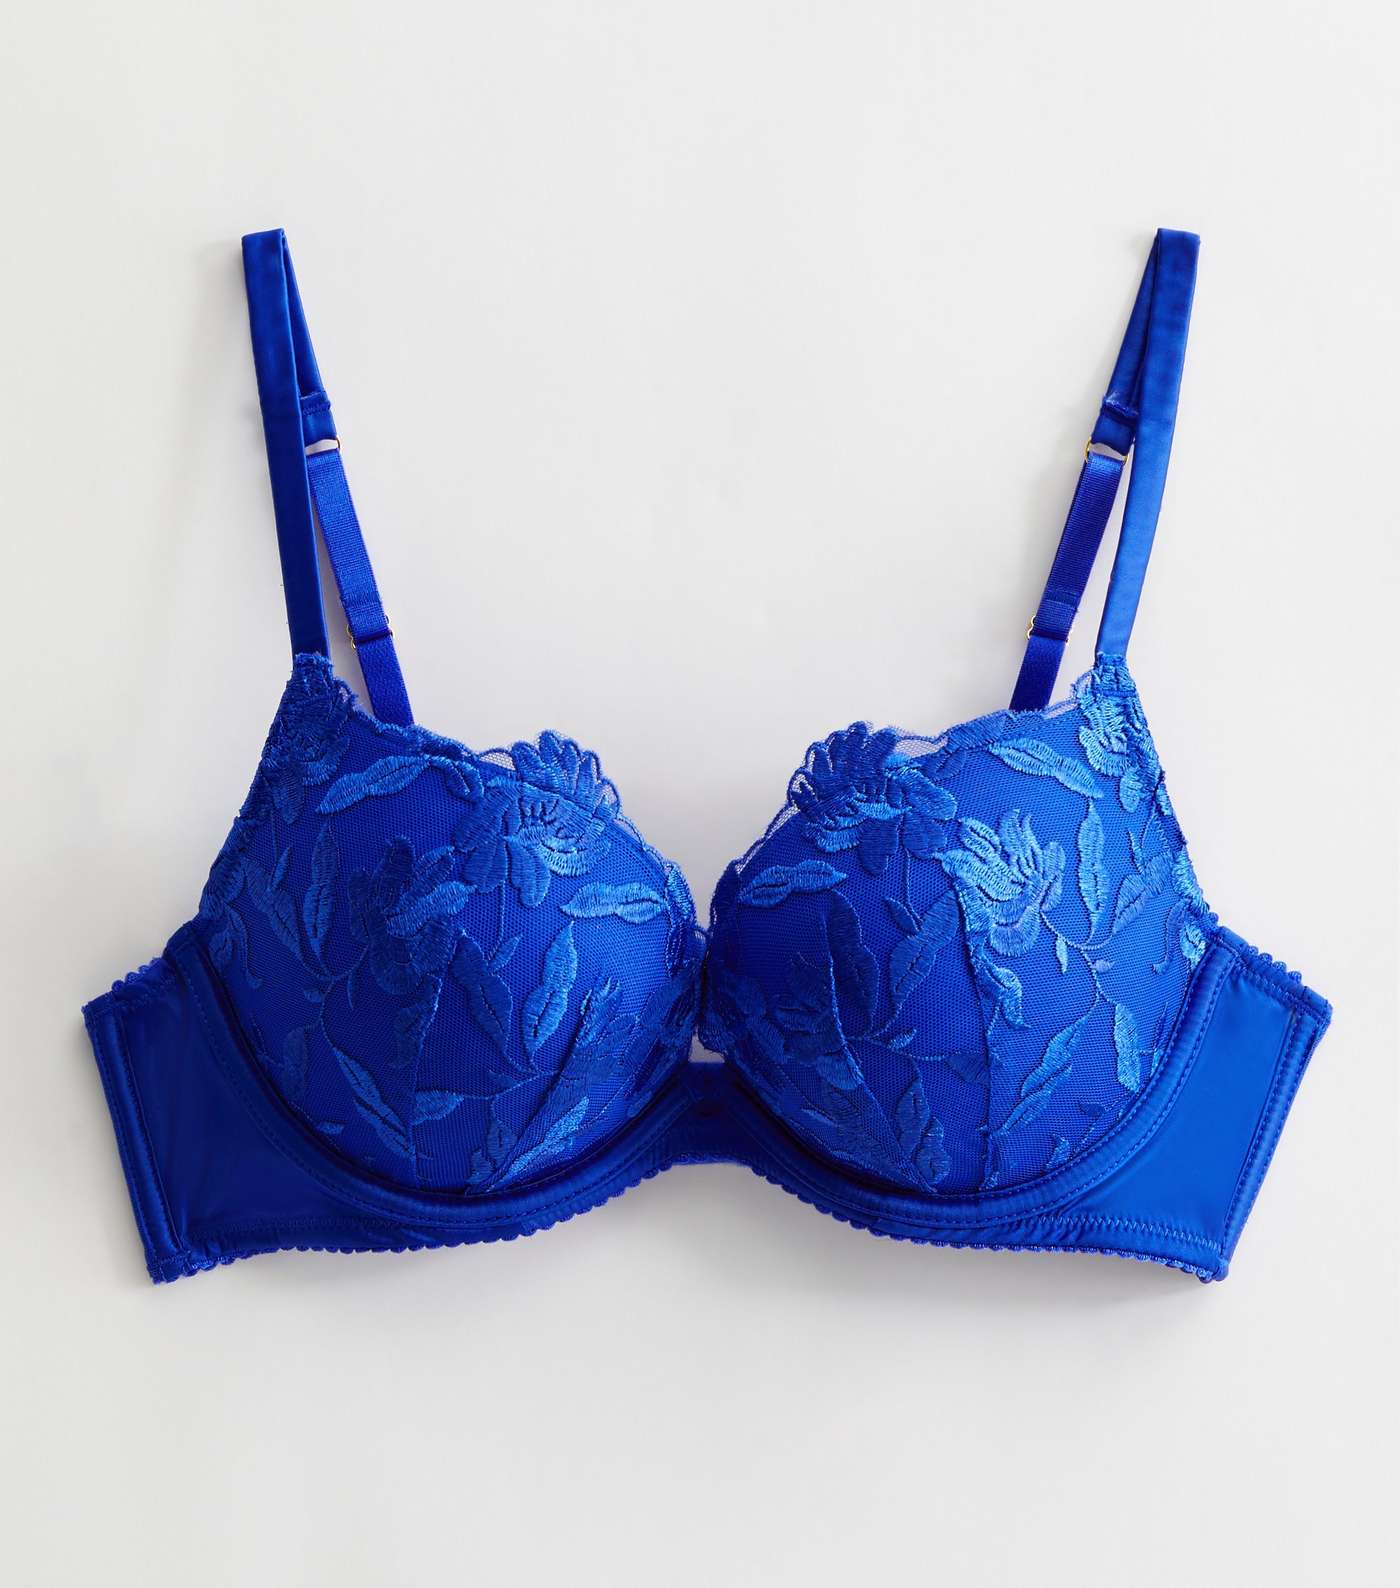 Paramour Women's Lotus Unlined Embroidered Bra - Dazzling Blue